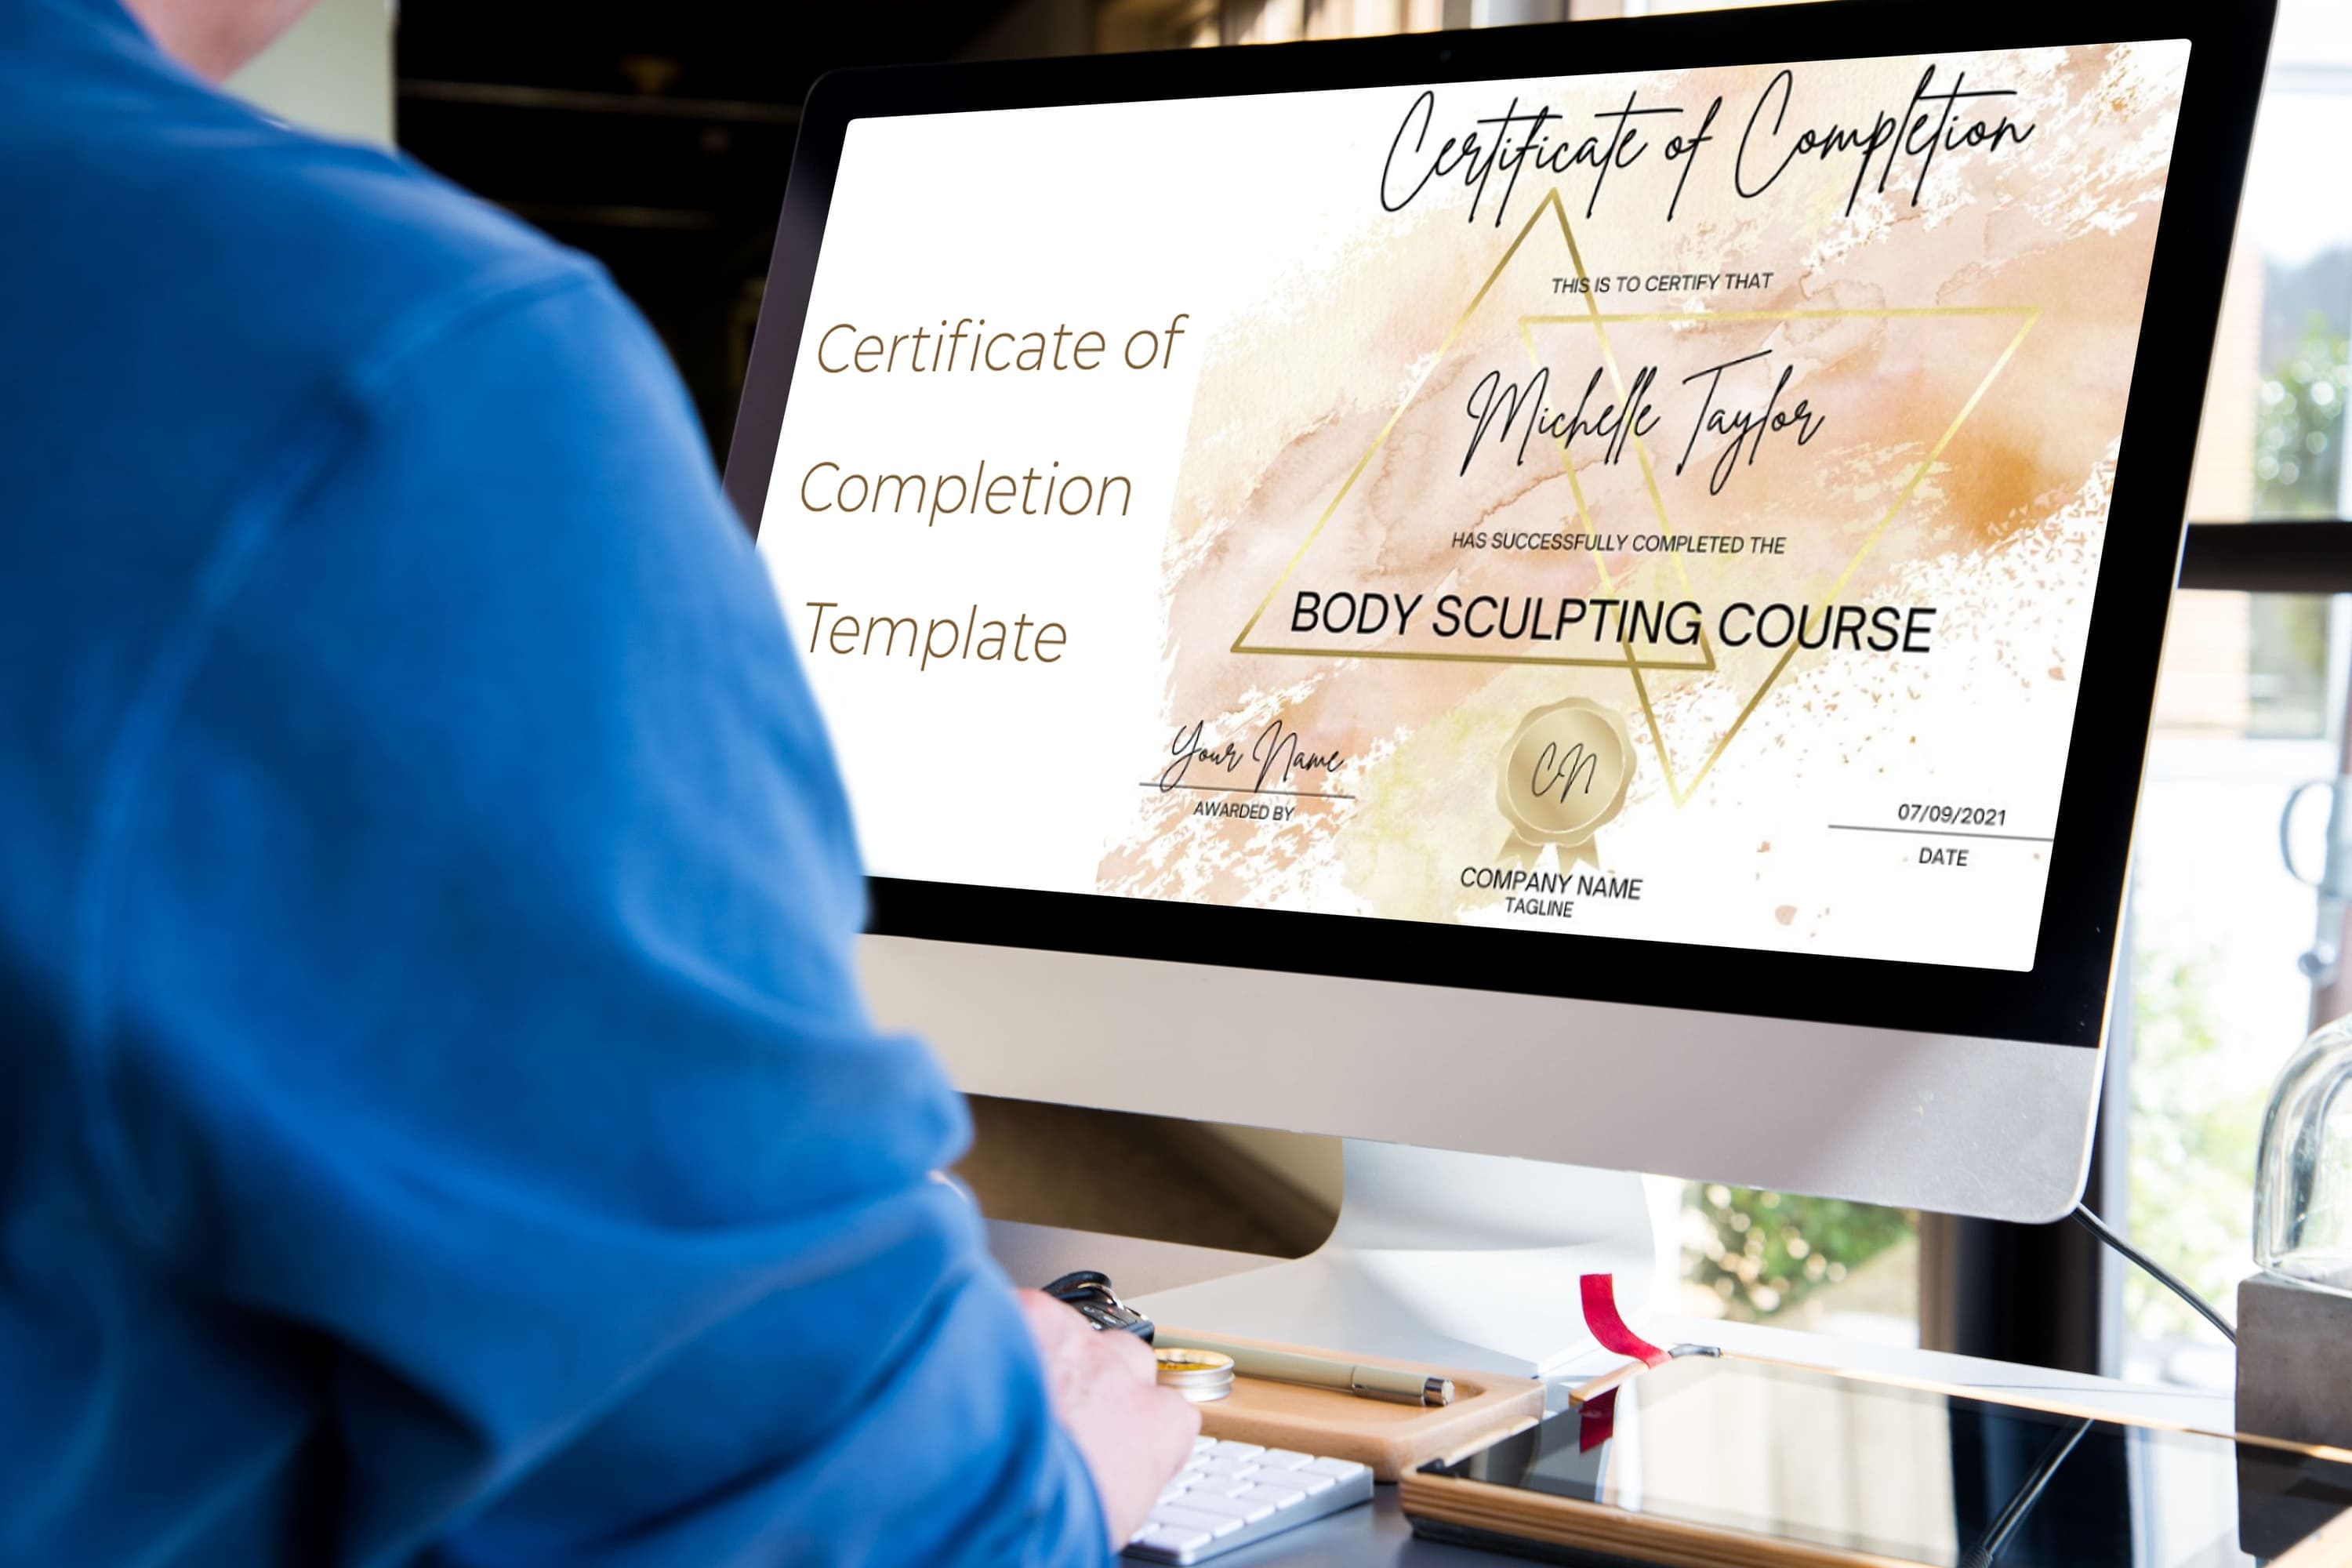 Certificate Of Completion Template - Body Sculpting Course On The Monoblock.